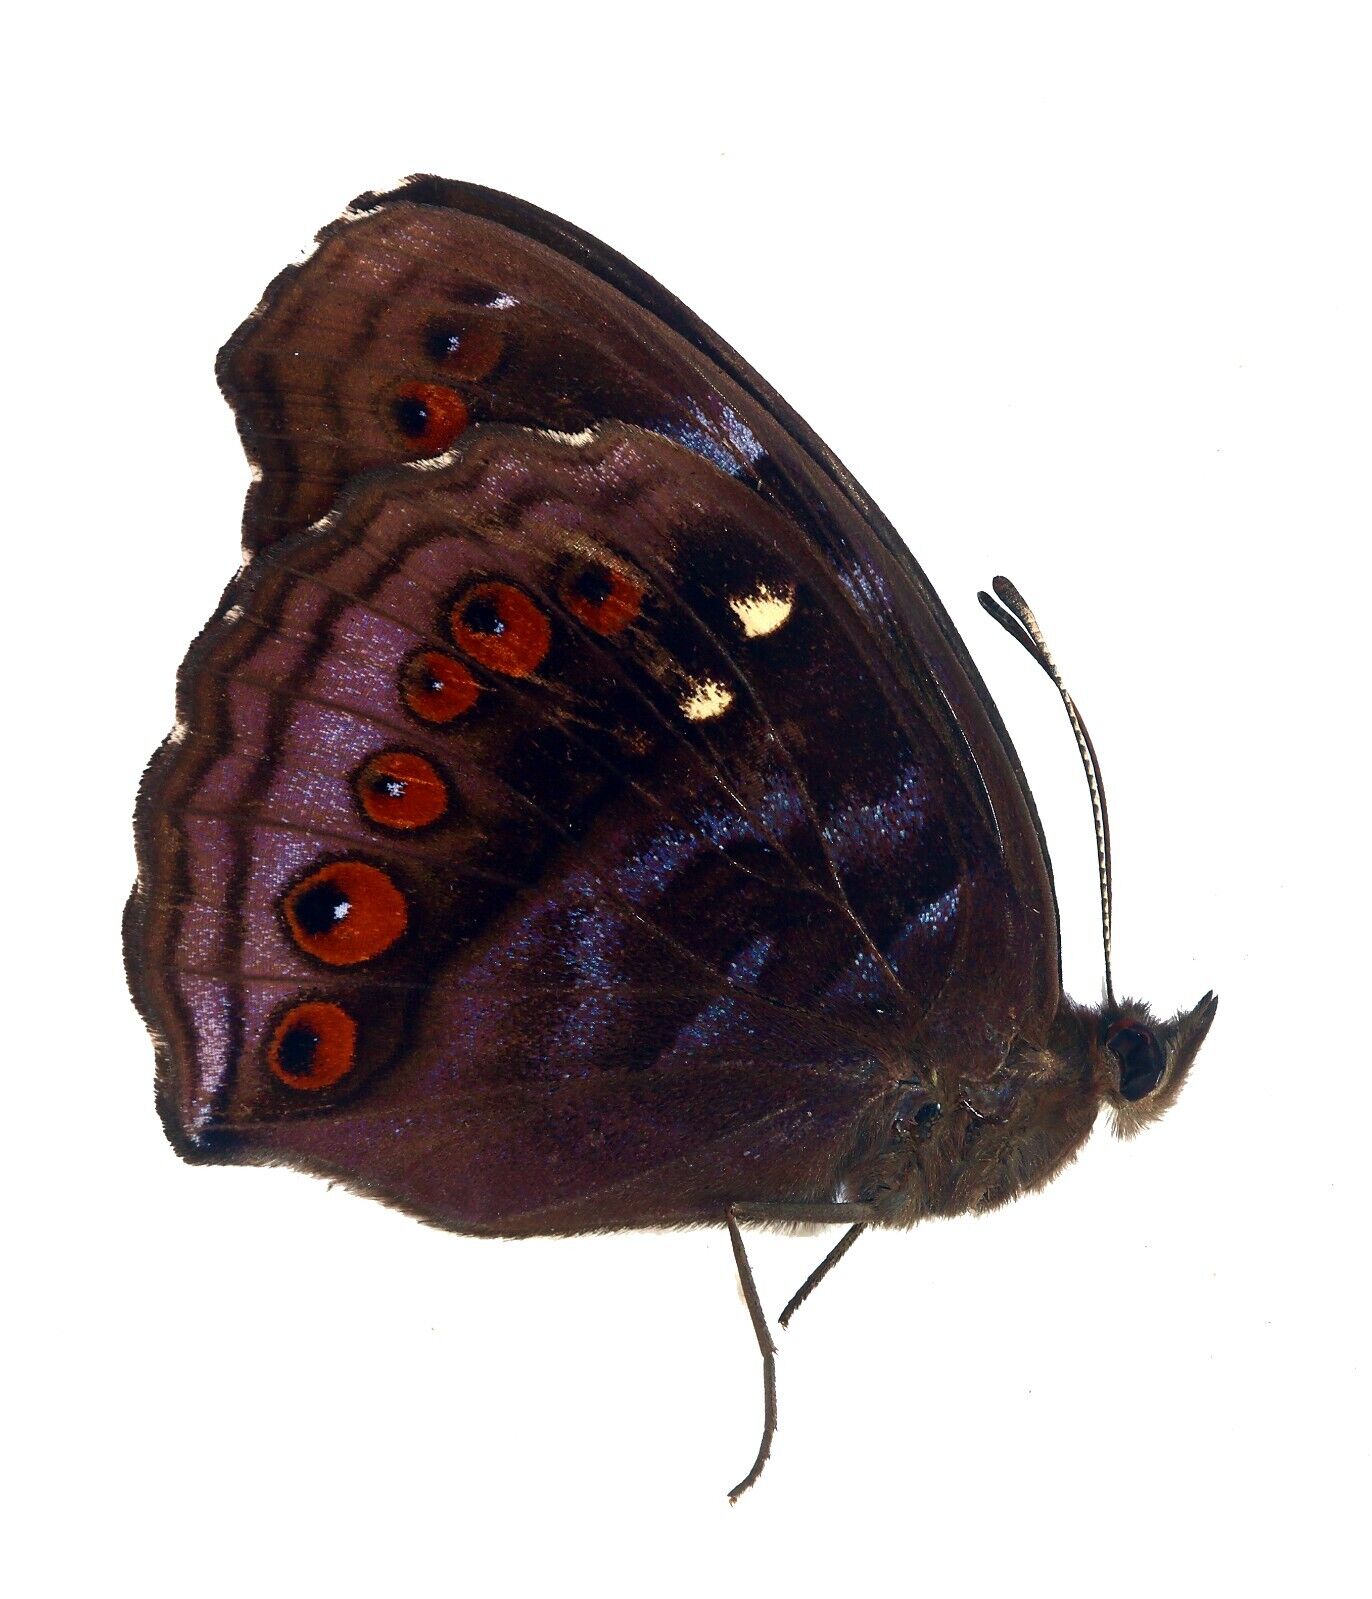 LEPIDOPTERA, NYMPHALIDAE, NYMPHALINAE, PRECIS HEDONIA from INDONESIA